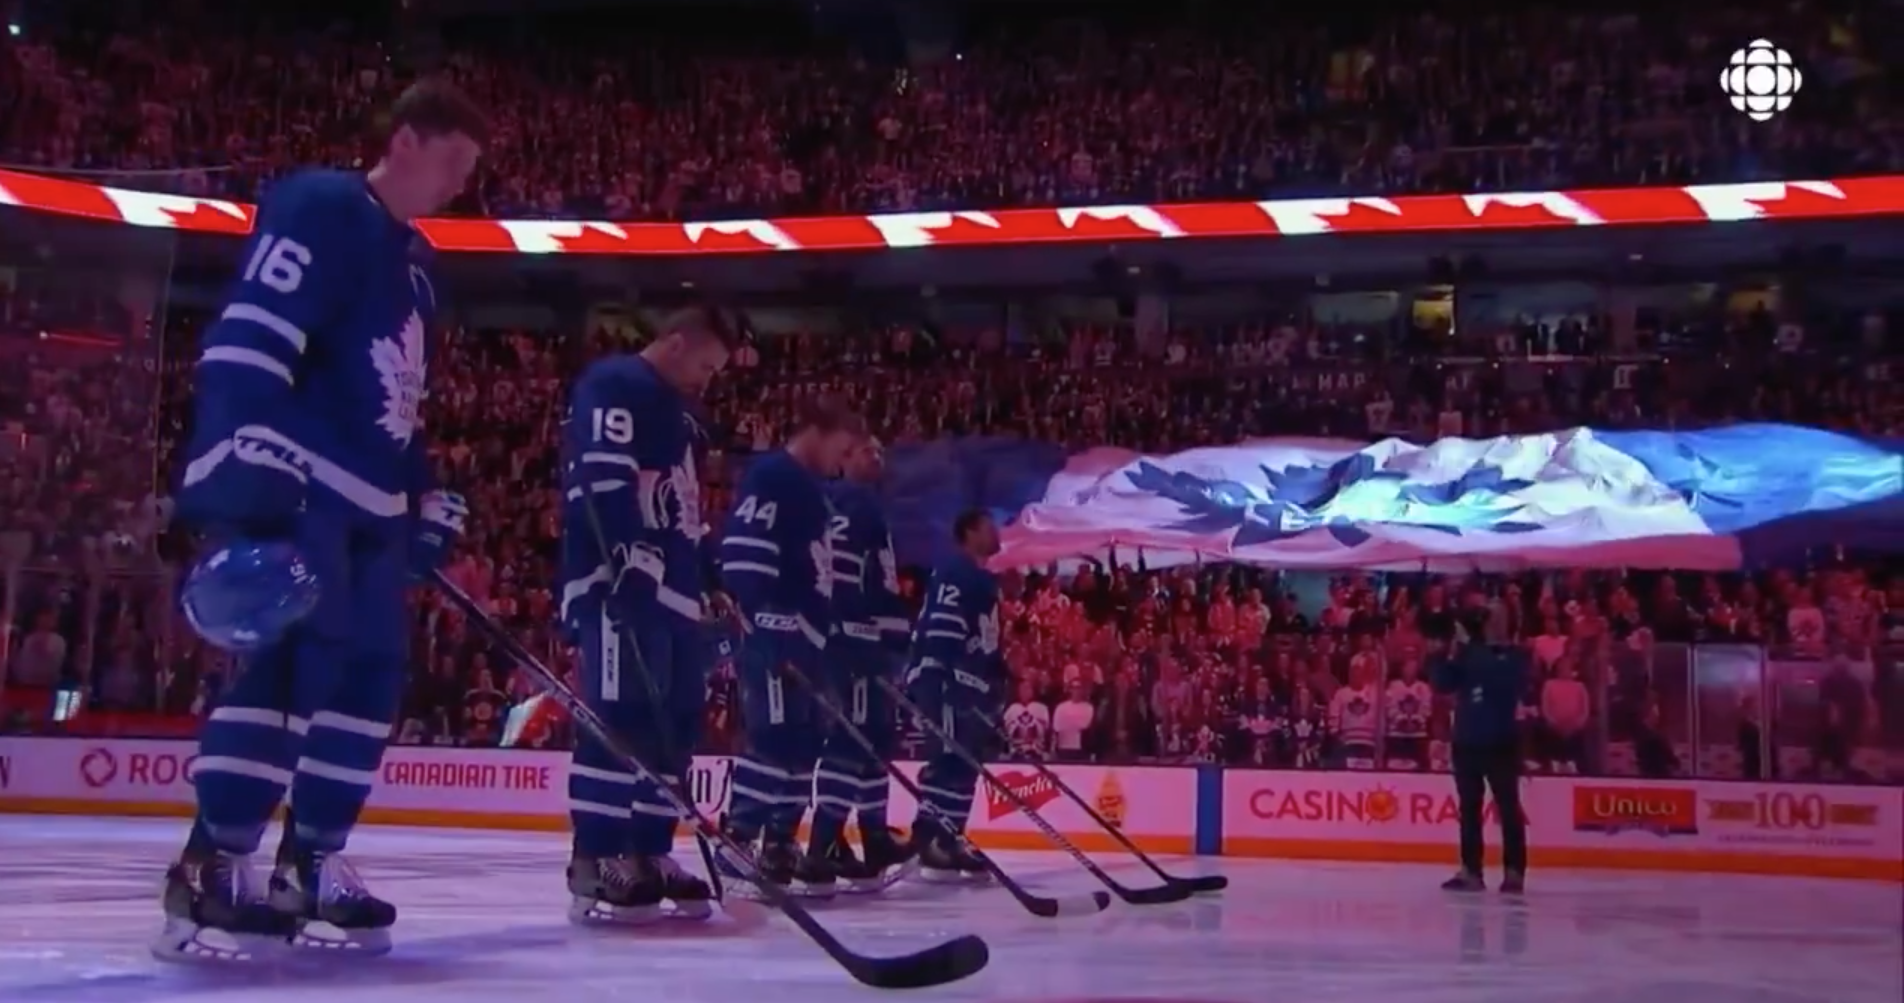 The Toronto Maple Leafs&#039; fans belt the national anthem.